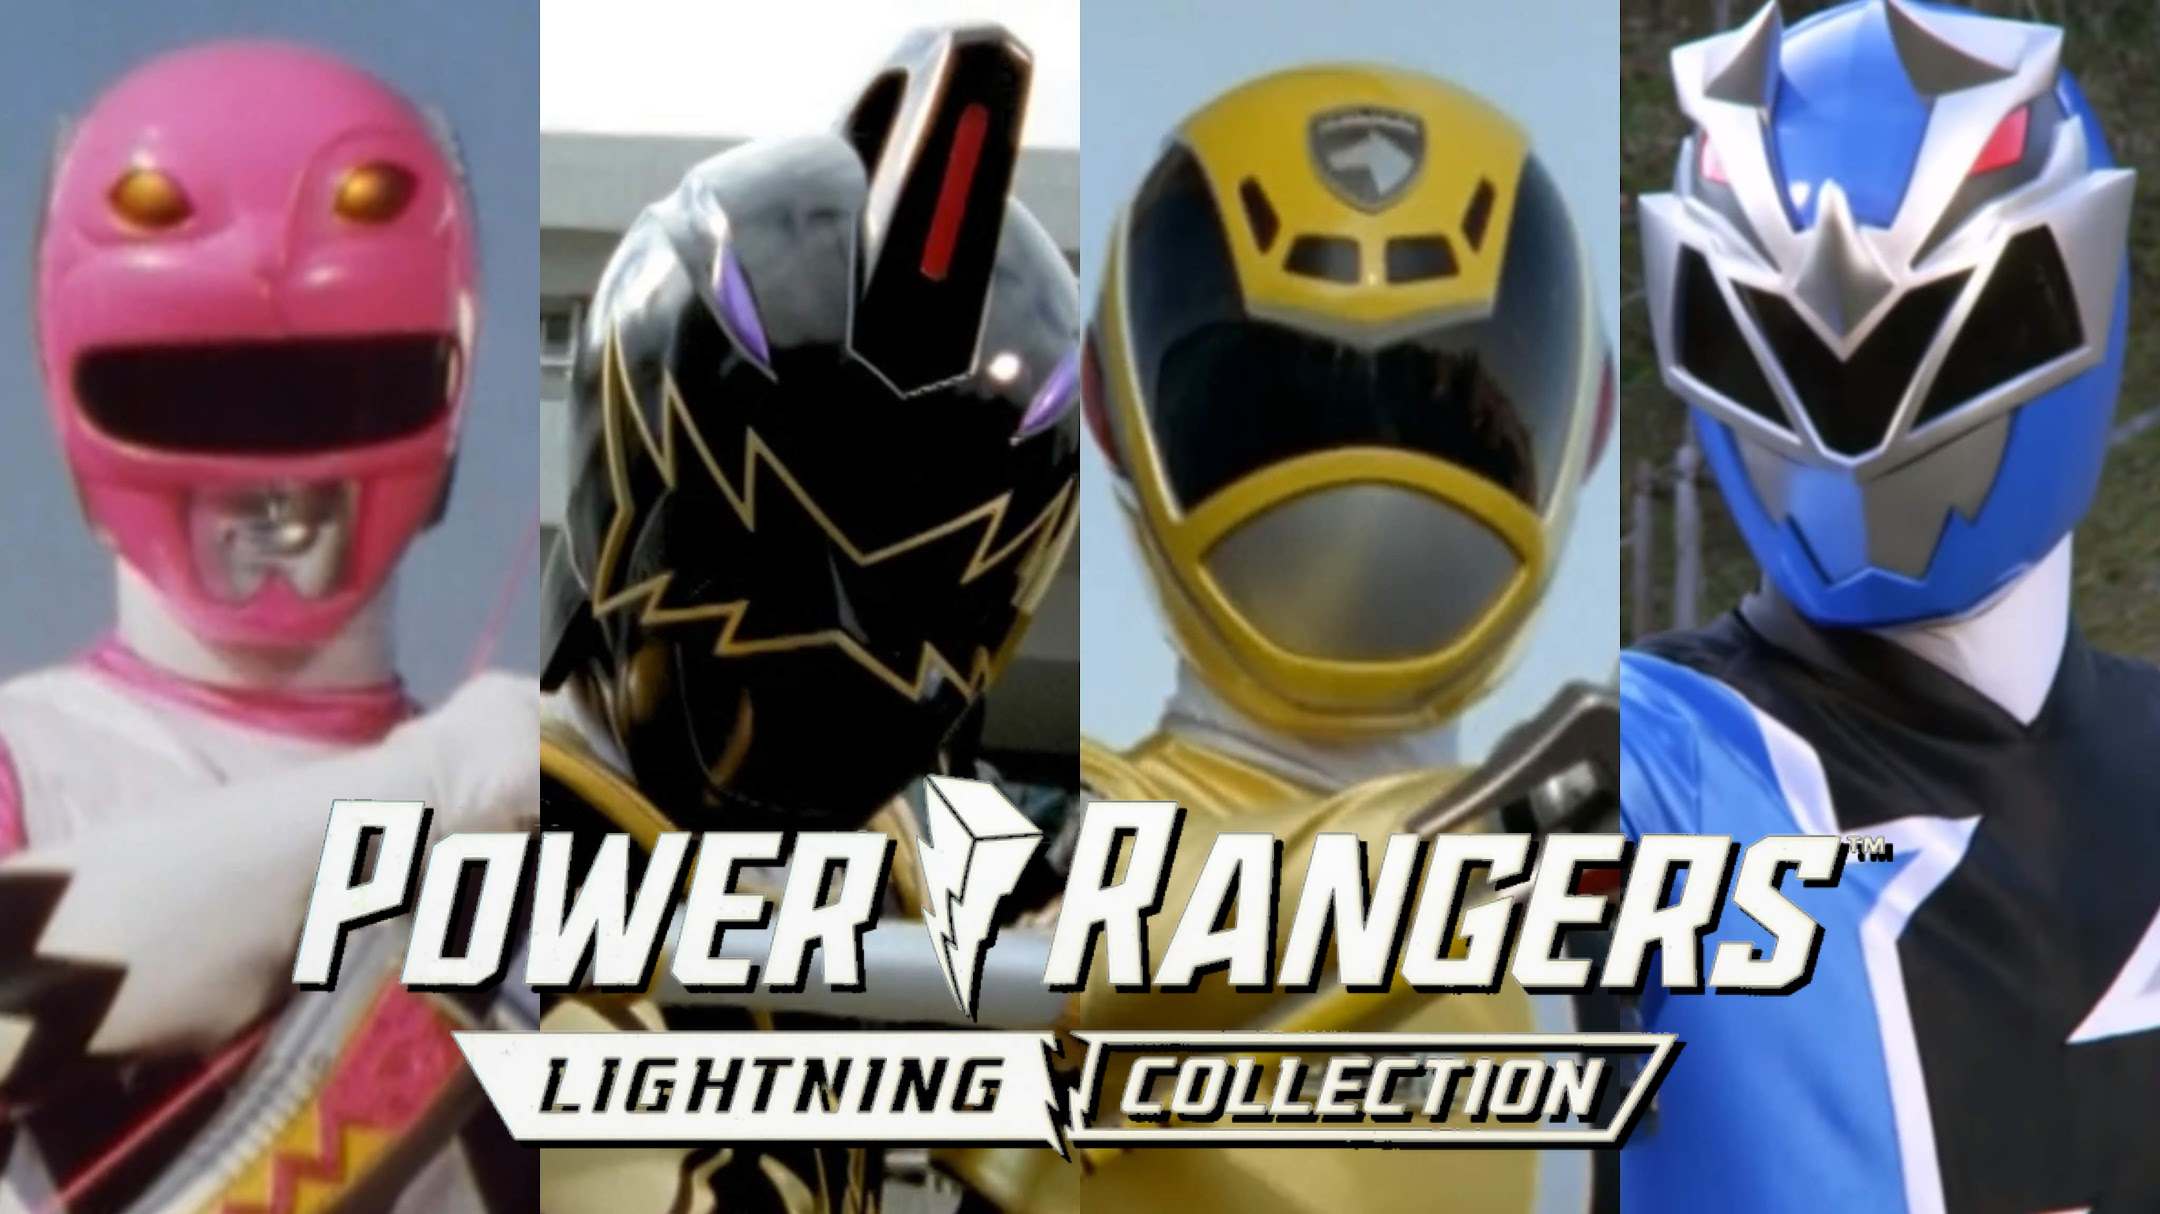 New Details On Hasbro’s Power Rangers Lightning Collection Wave 14